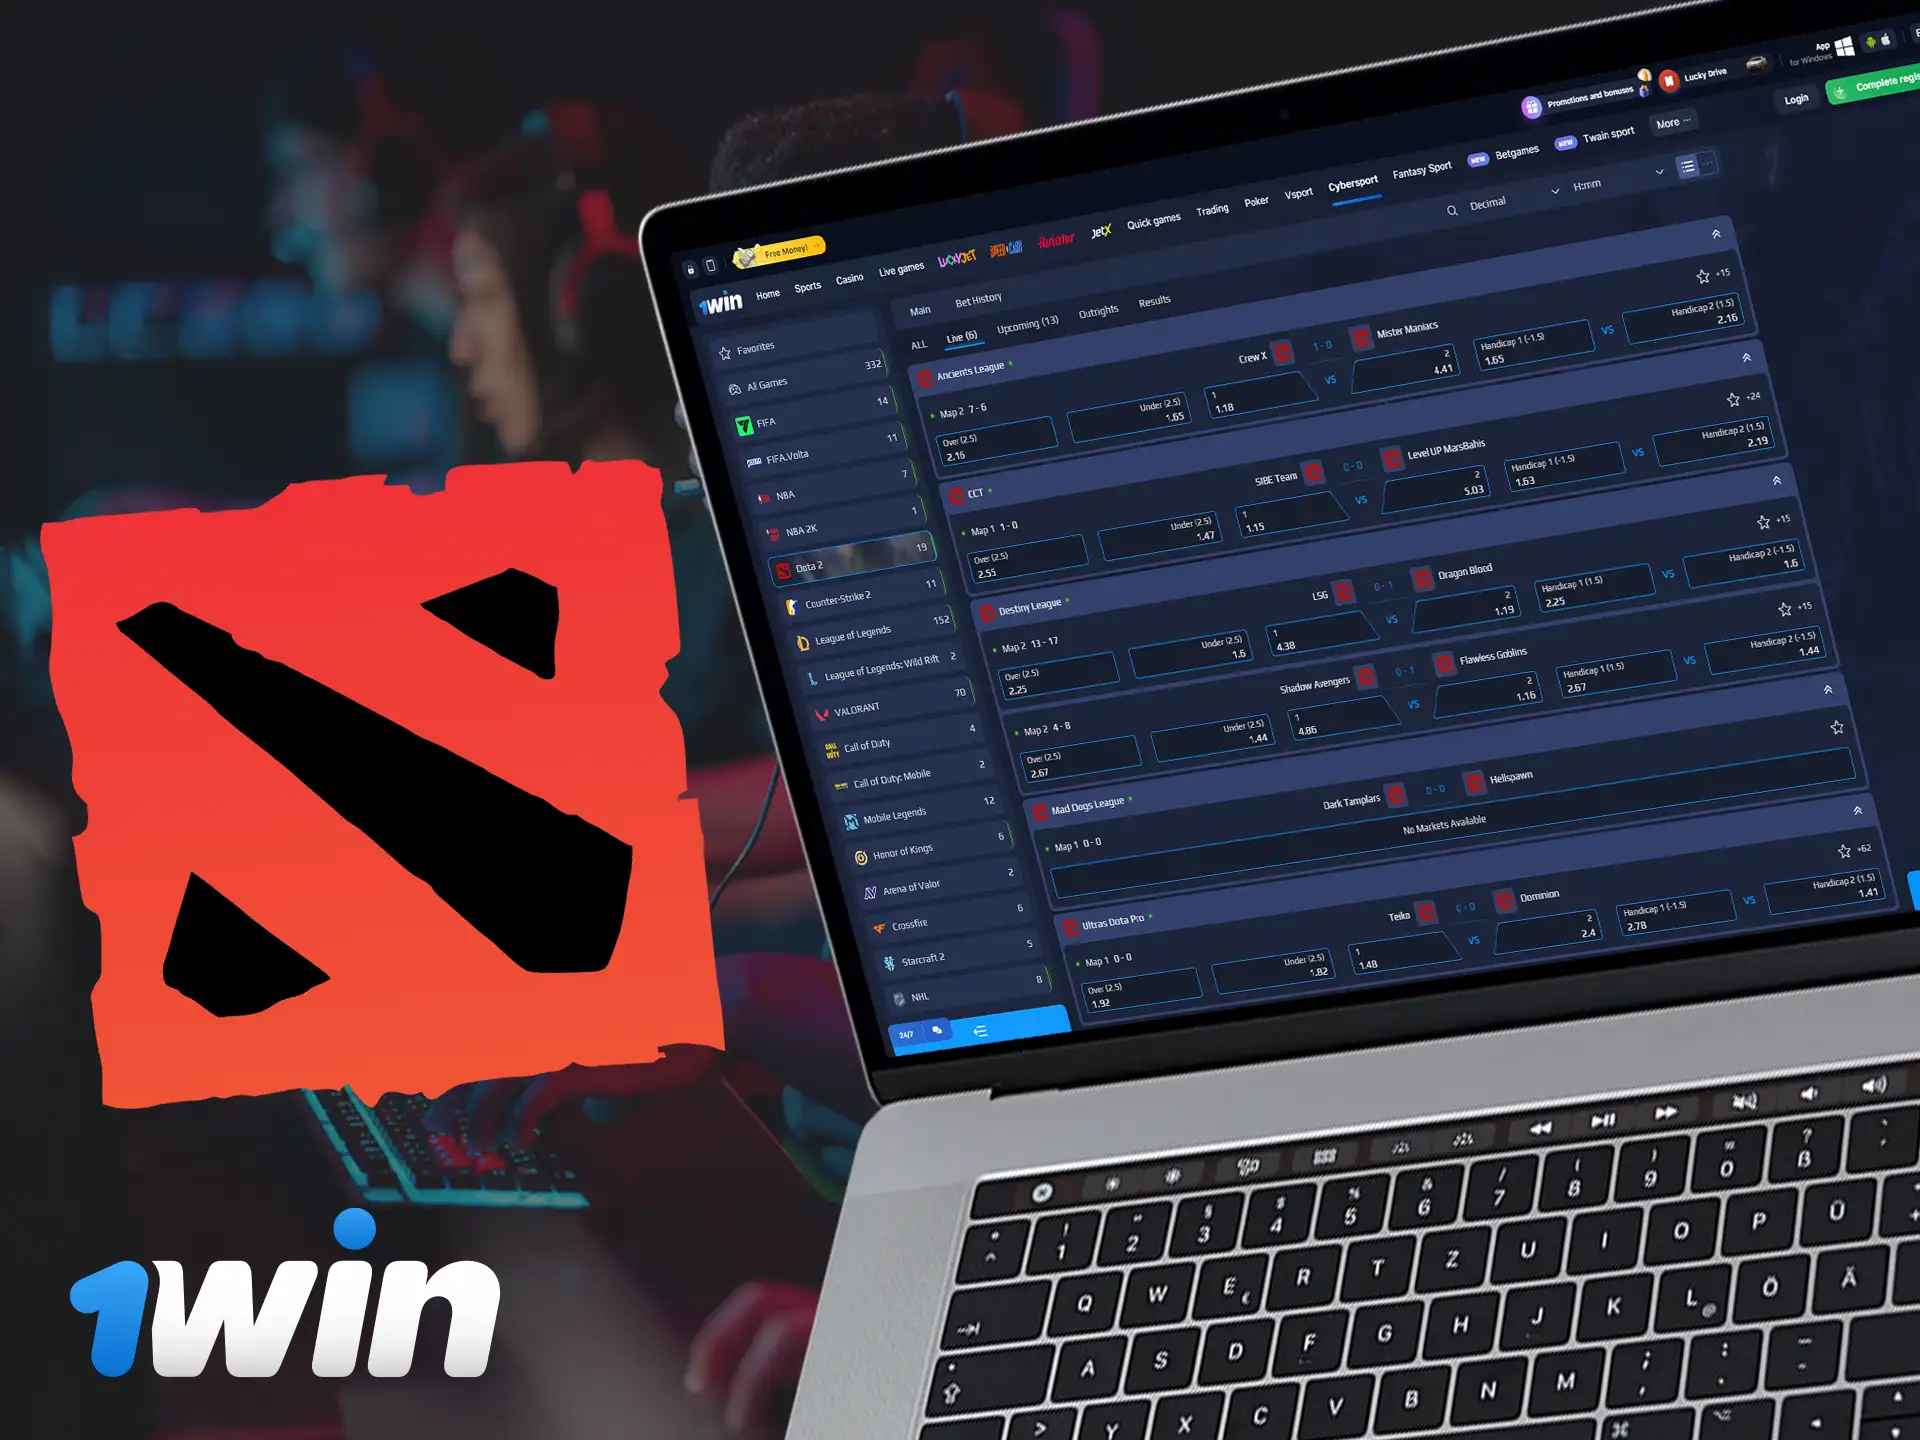 1Win gives fans the opportunity to follow and bet on popular Dota 2 tournaments.